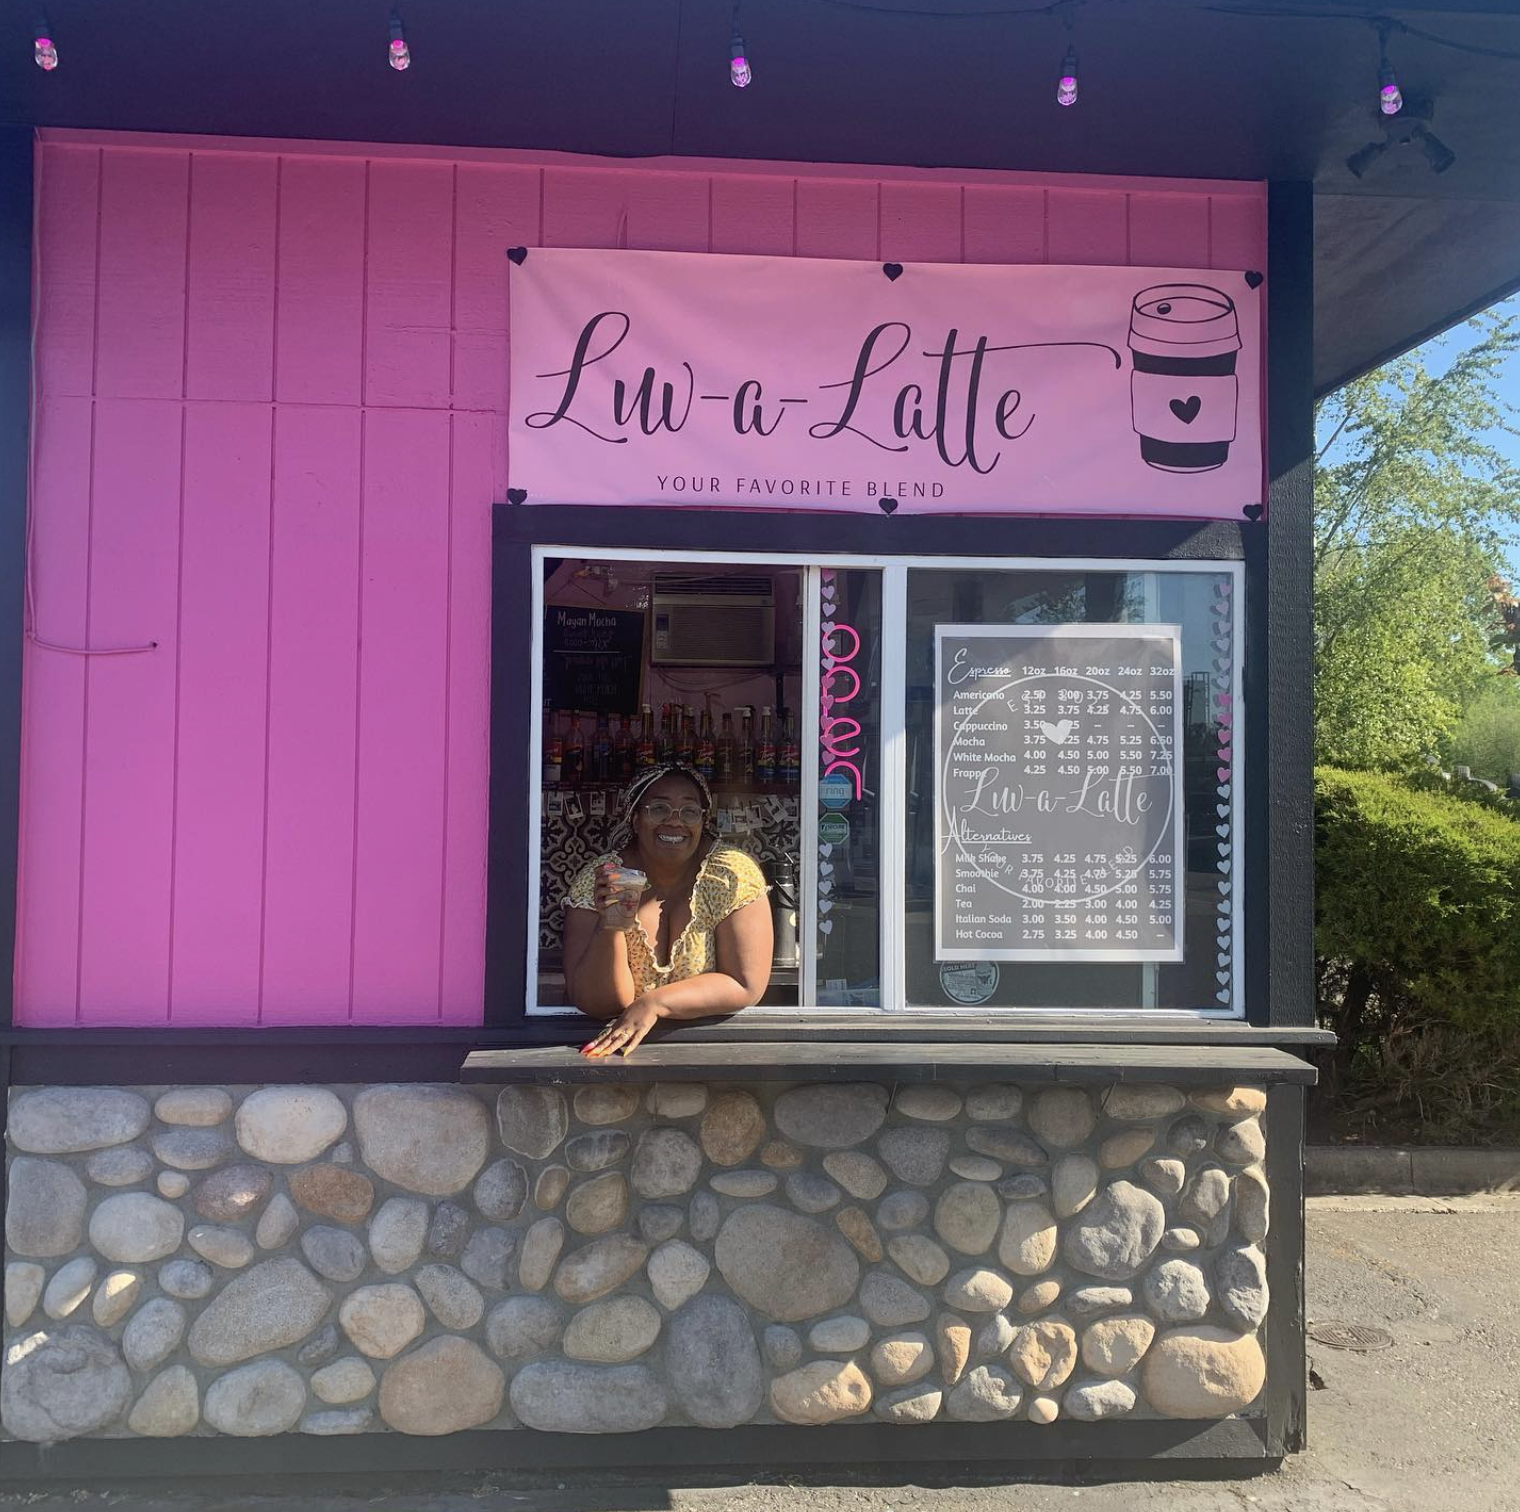 Luv-a-Latte drive-thru coffee shop exterior painted bright pink with the owner leaning out the window